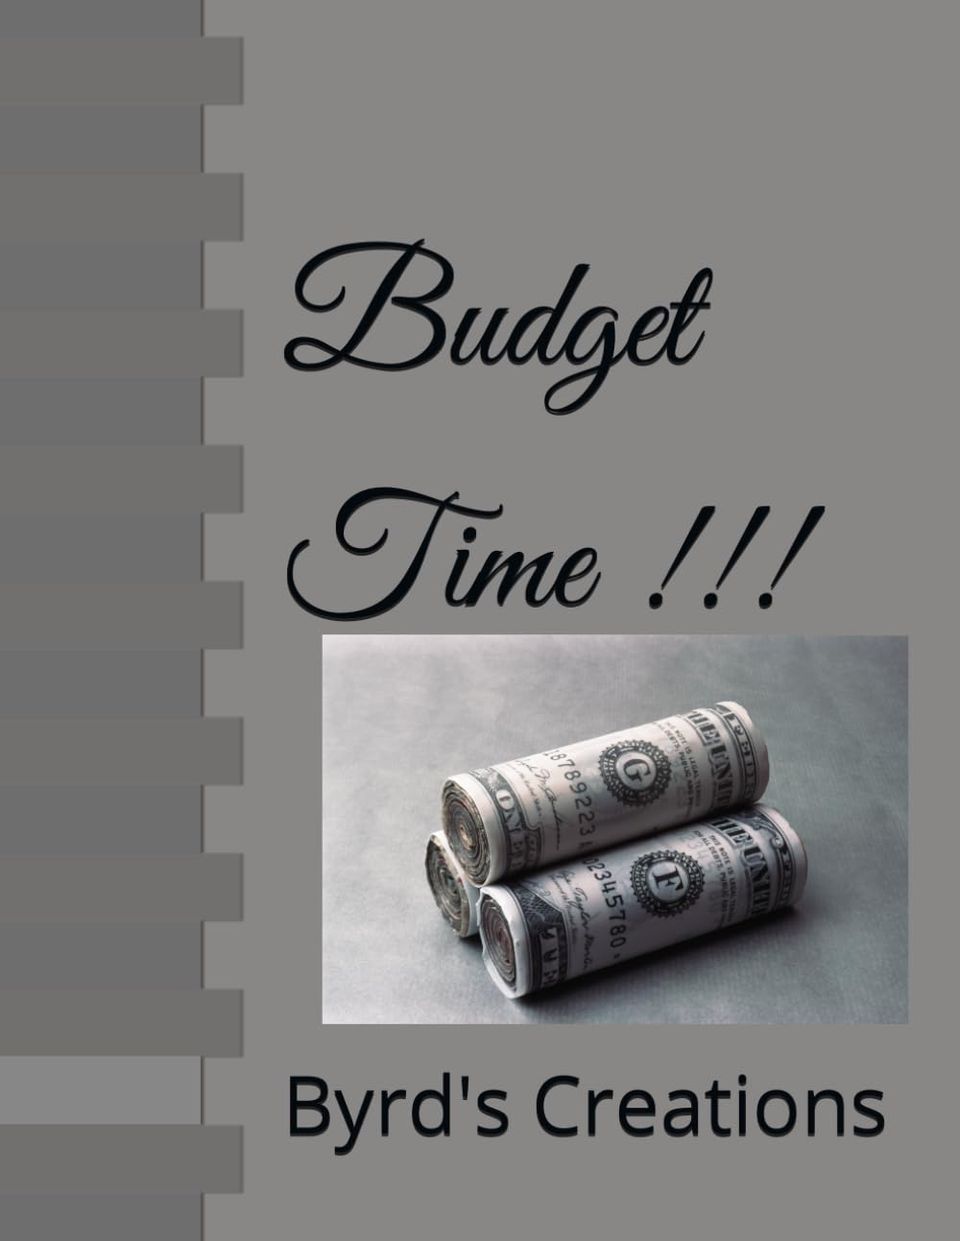 Budget time